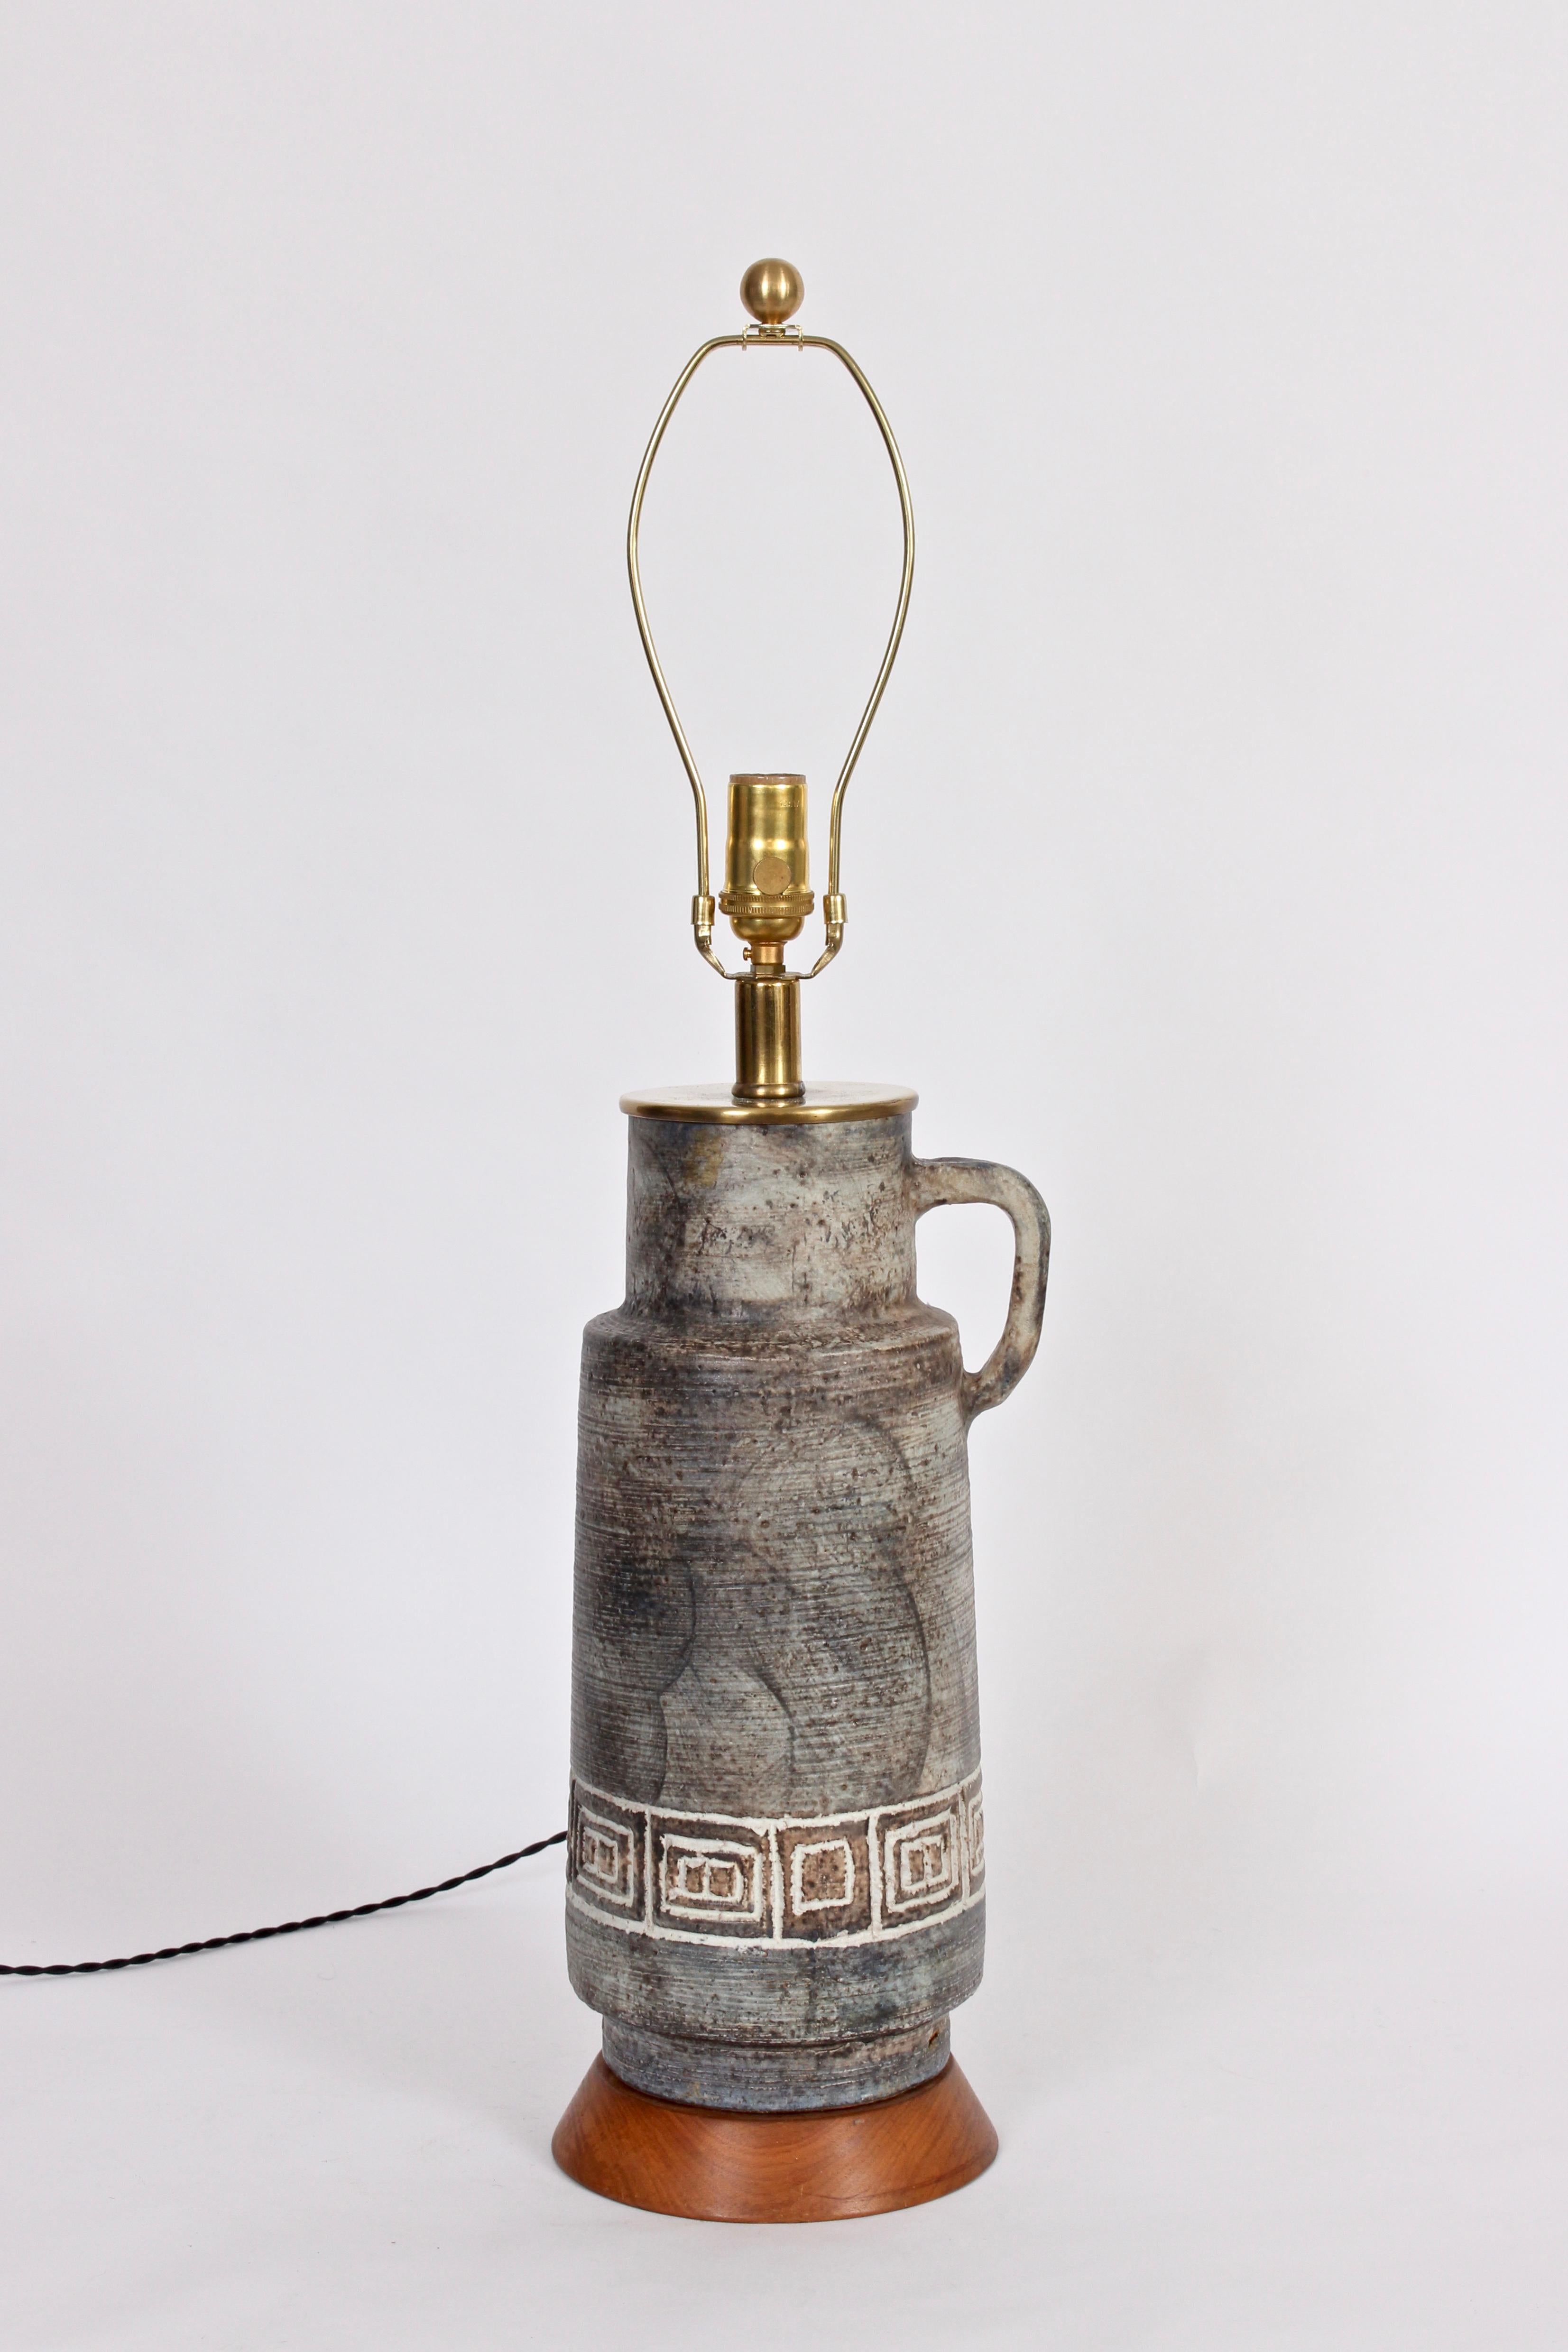 Handcrafted mottled Gray, White & Earthen art studio pottery table lamp. Featuring a hand crafted handled pitcher form, layered gray range, vertical texture and abstract bright white detailed Greek key design. On tapered, round Walnut base. 22 H to